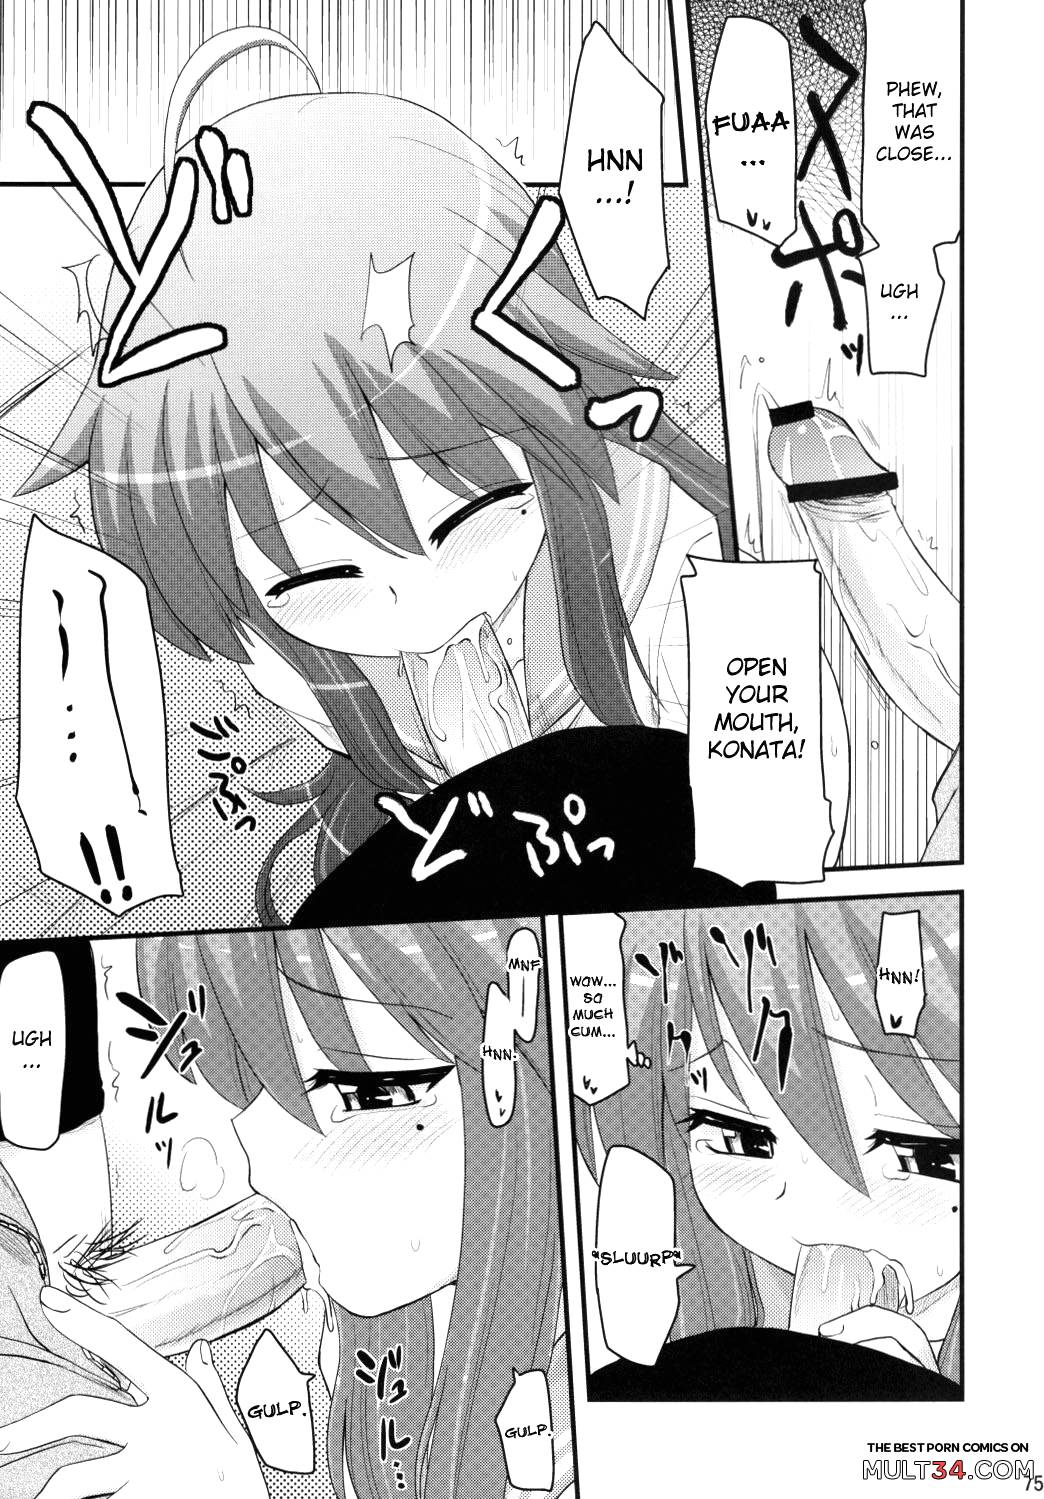 Konata and Oh-zu 4 people each and every one + 1 page 71